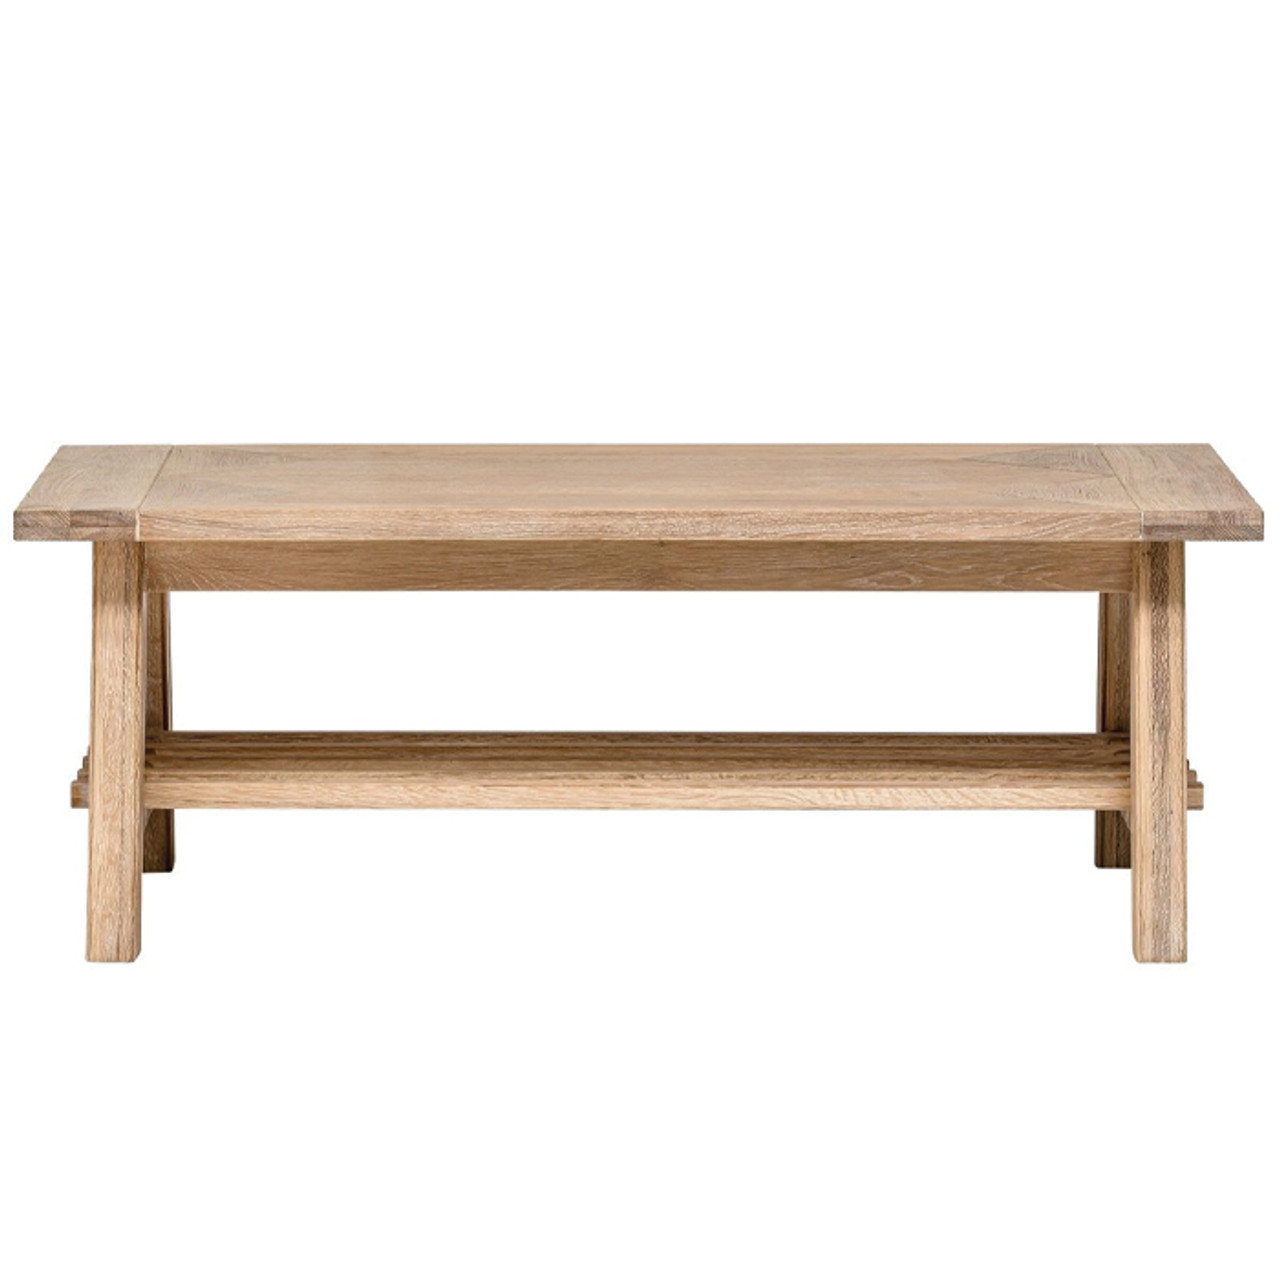 Dunmore Coffee Table